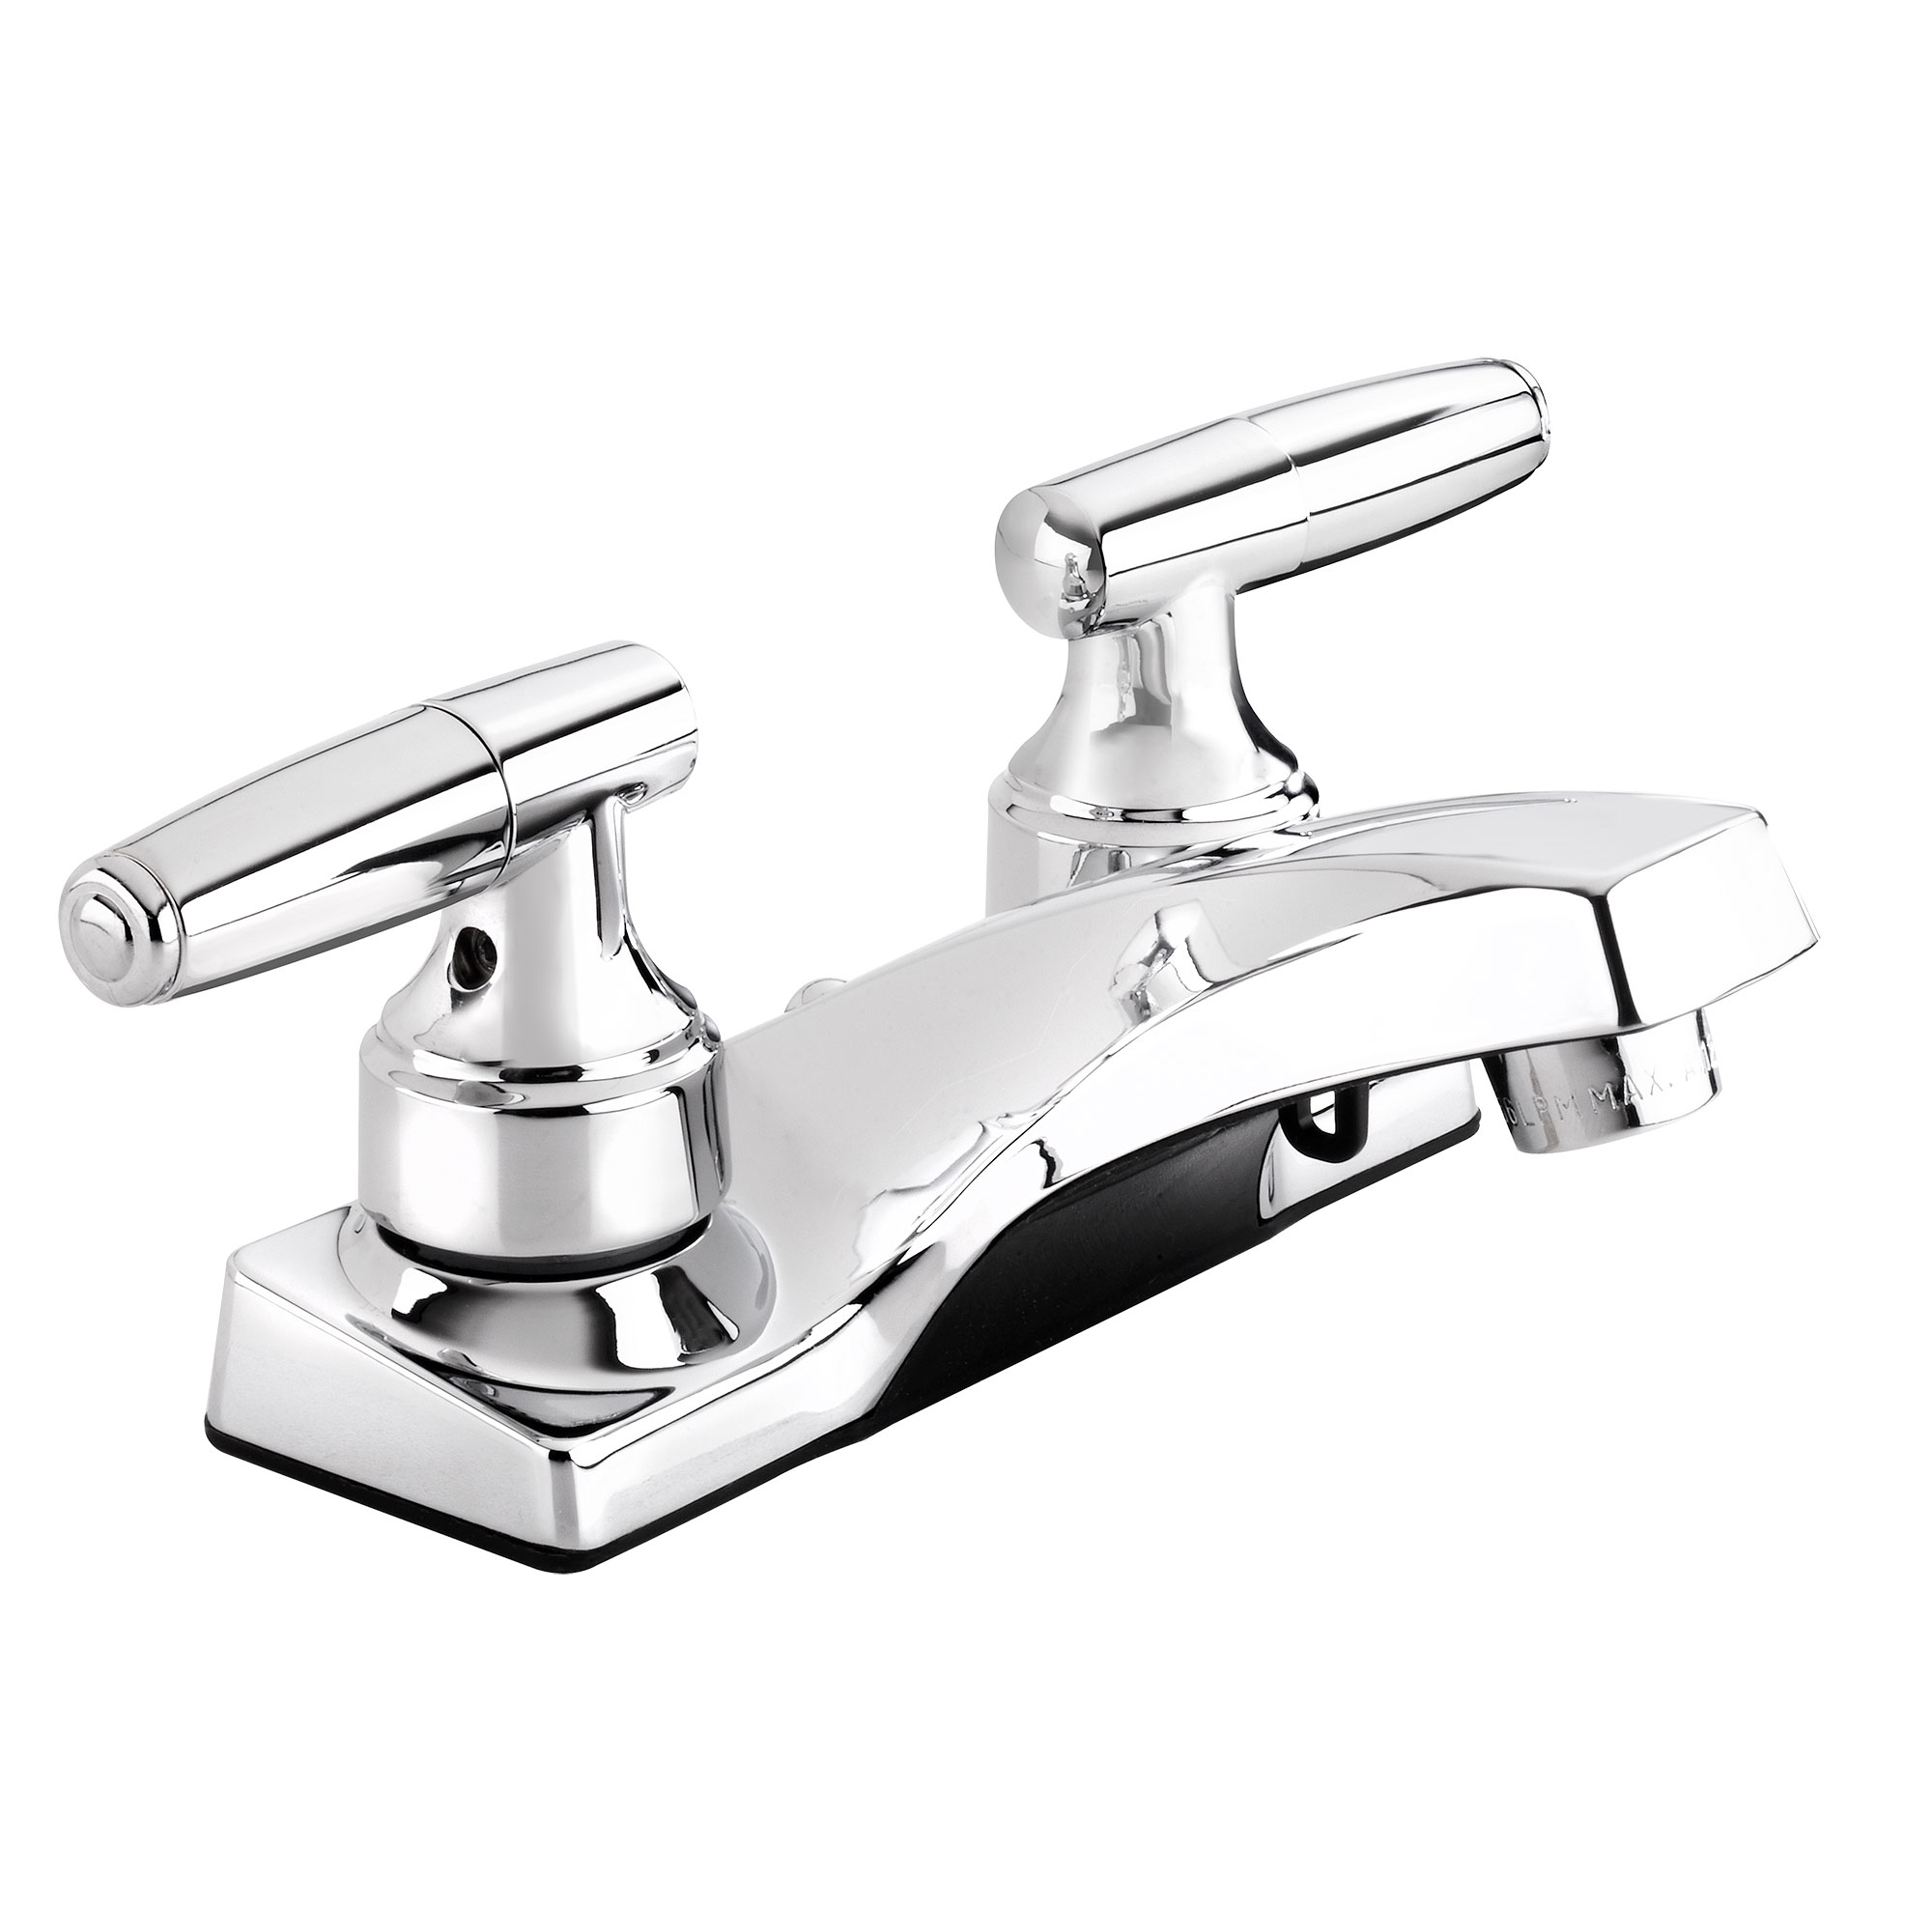 Ebu73wcp 6.3 X 7.48 X 4.96 In. Bathroom Sink Faucet With 2 Handles & 4 In. Centerset, Polished Chrome